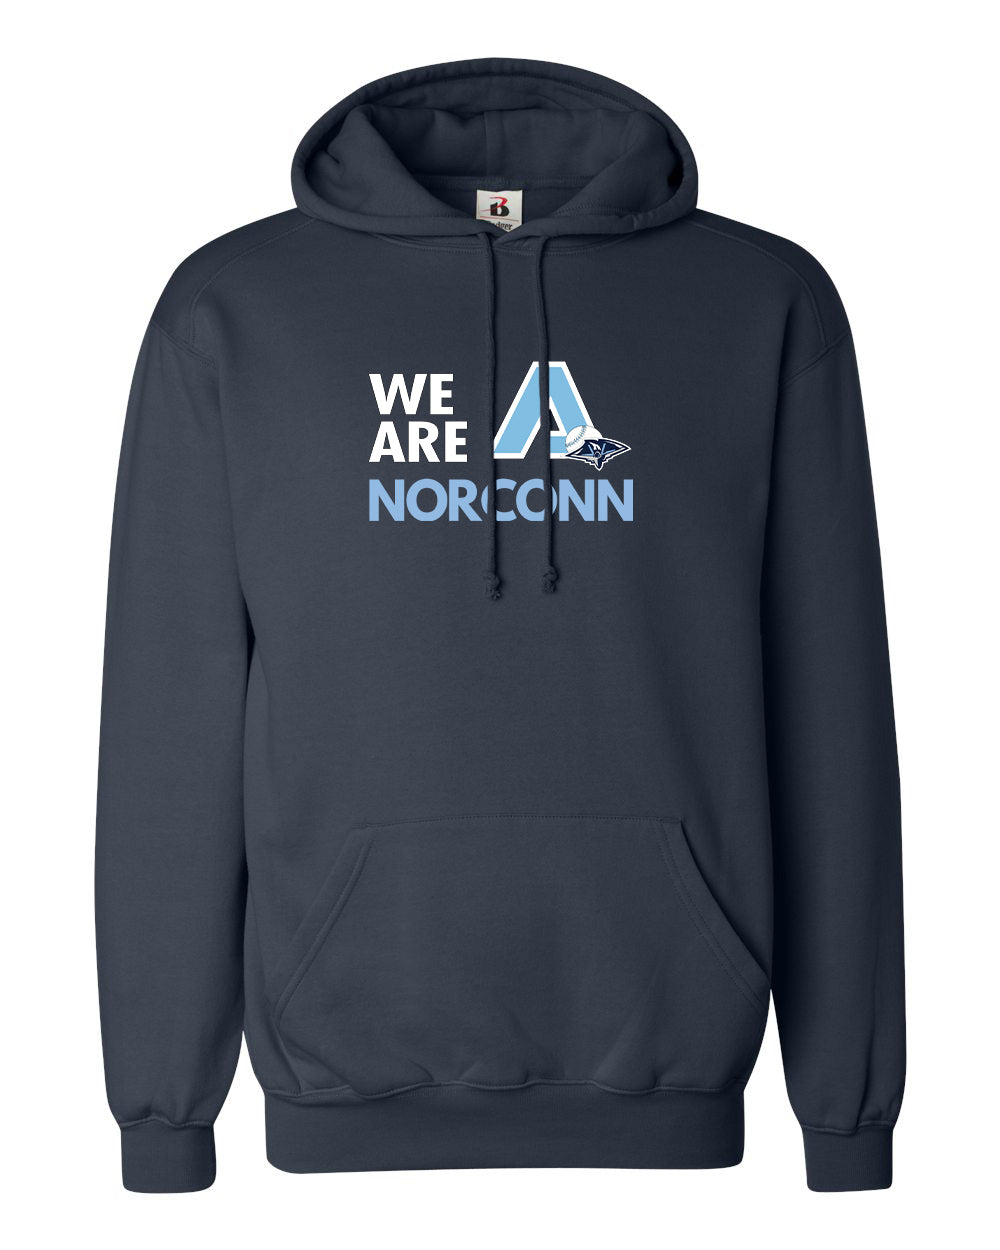 Norconn Adult Badger Fleece Hoodie "We Are" - 1254 (color options available)